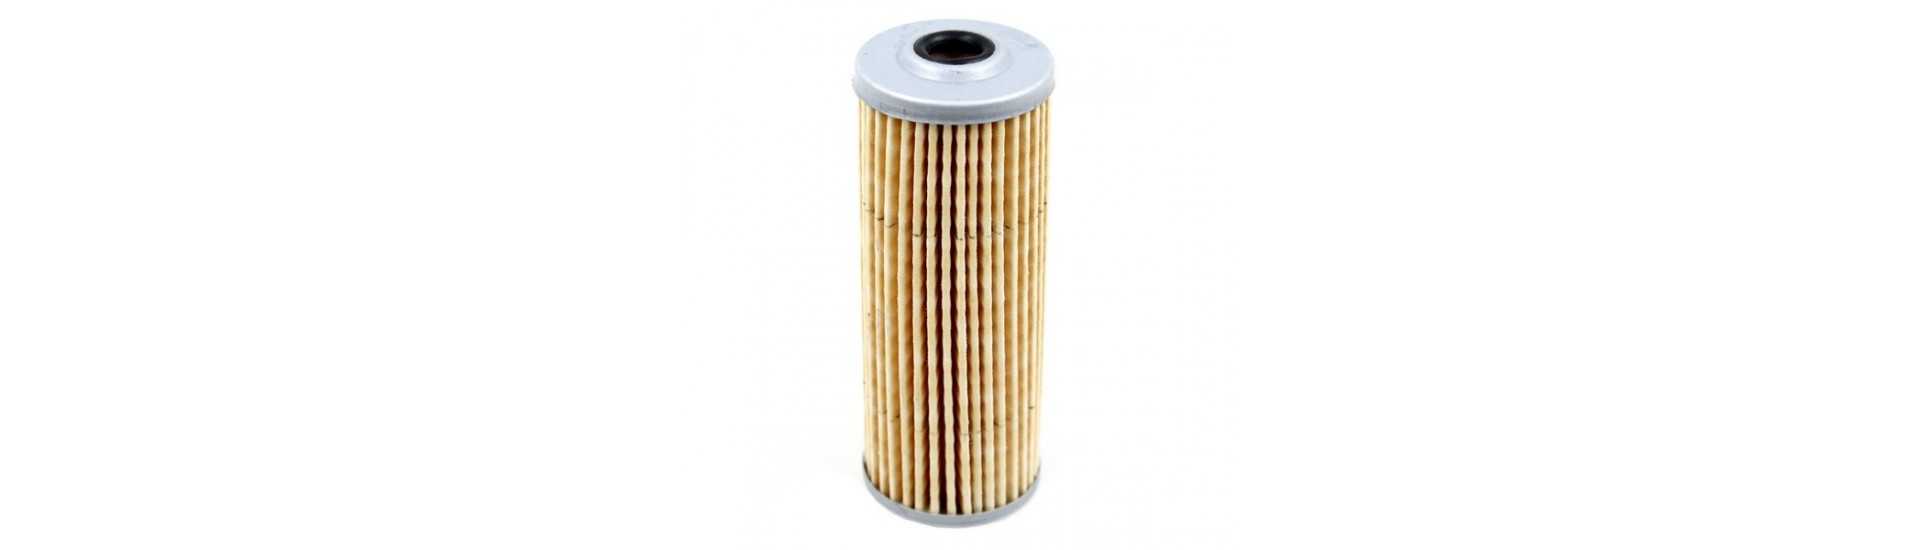 Gasoil filter at the best price for car without a permit